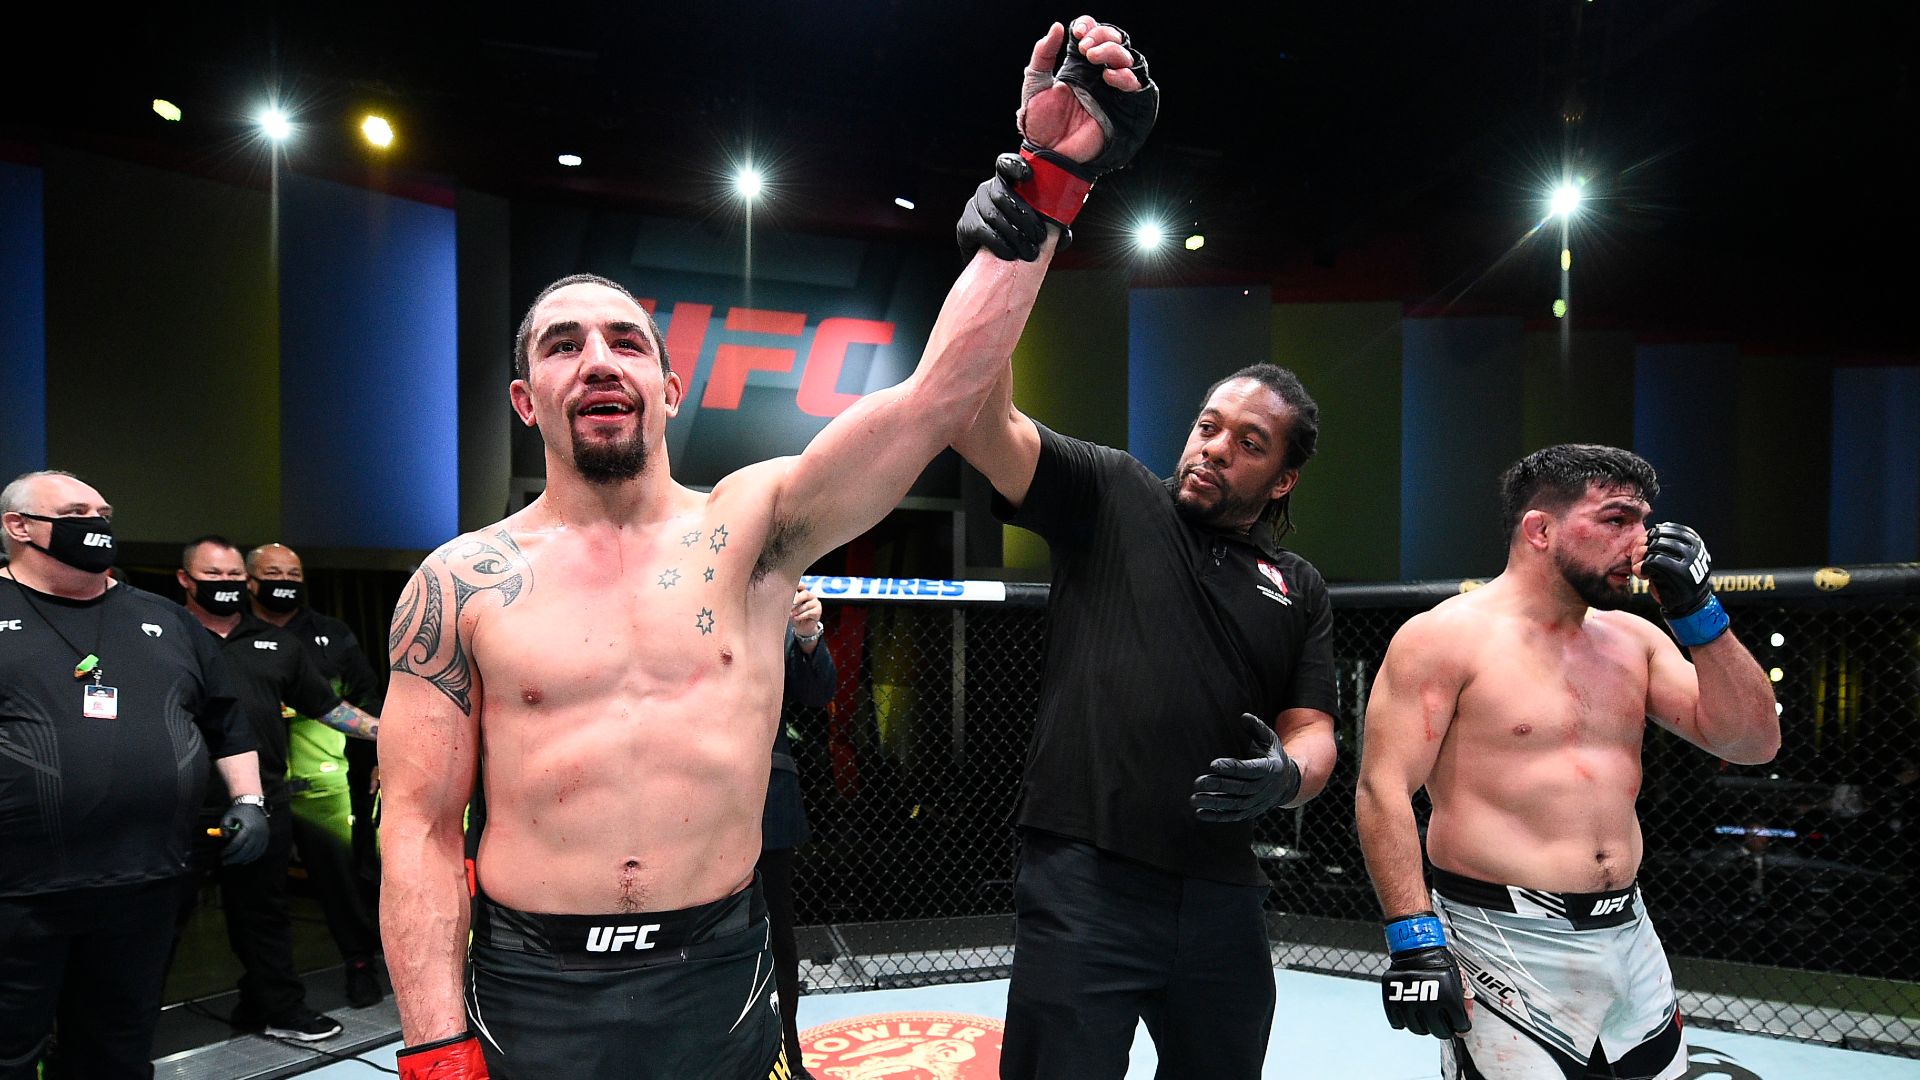 EXCLUSIVE: Robert Whittaker waits for Israel Adesanya rematch later in the year